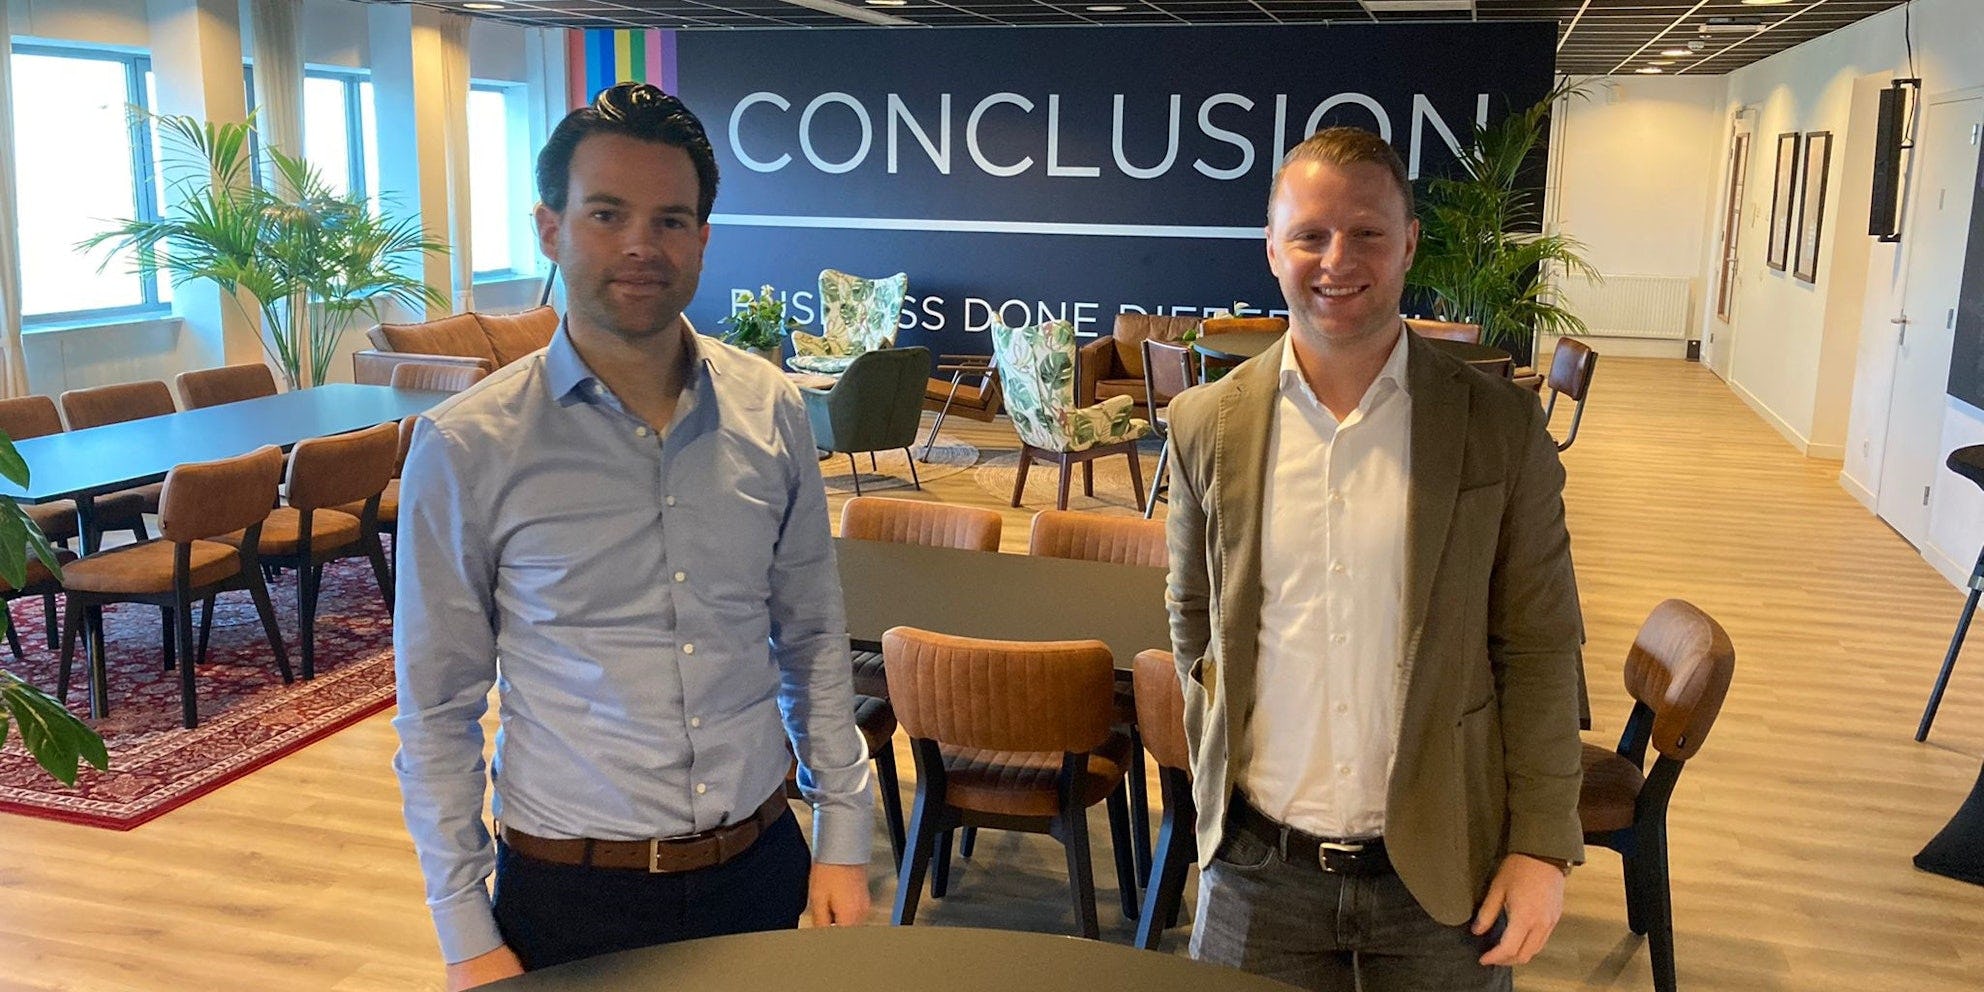 Onboarding januari 2022 Conclusion Consulting